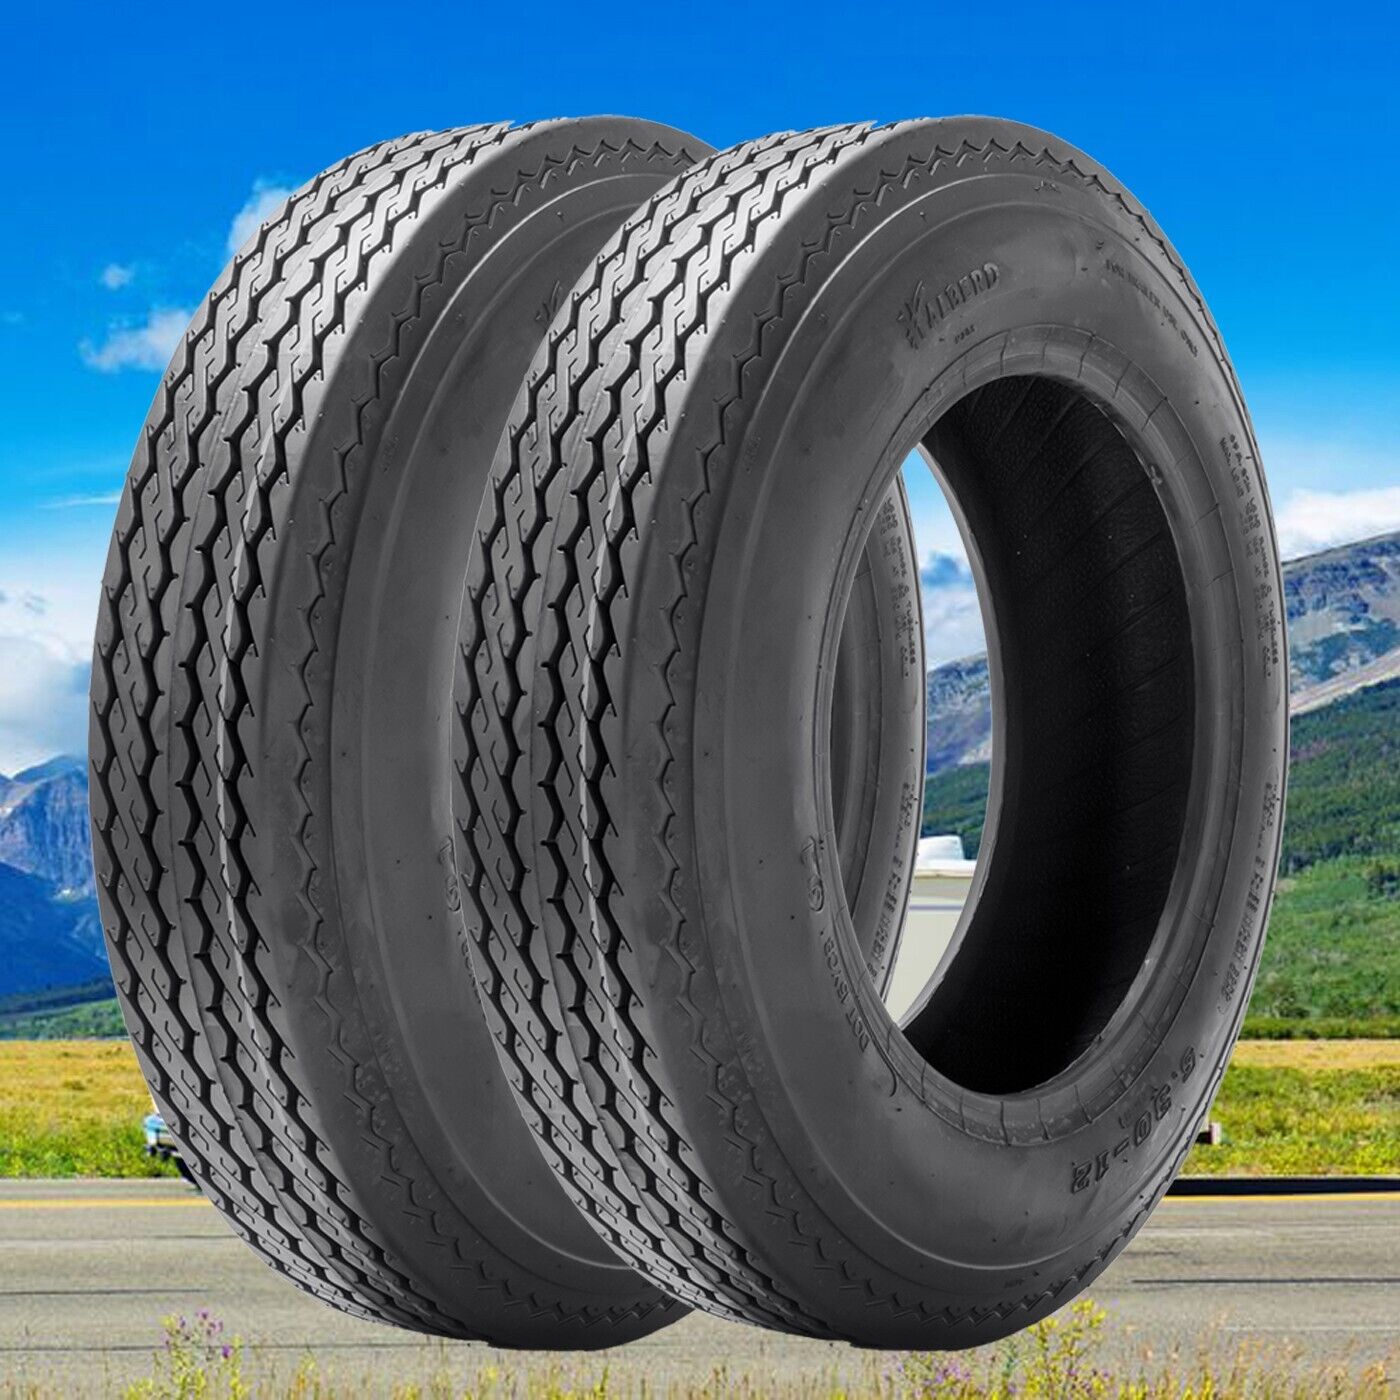 Set 2 4.80-12 Trailer Tires 6Ply 4.80x12 4.8-12 480-12 Replacement Load Range C